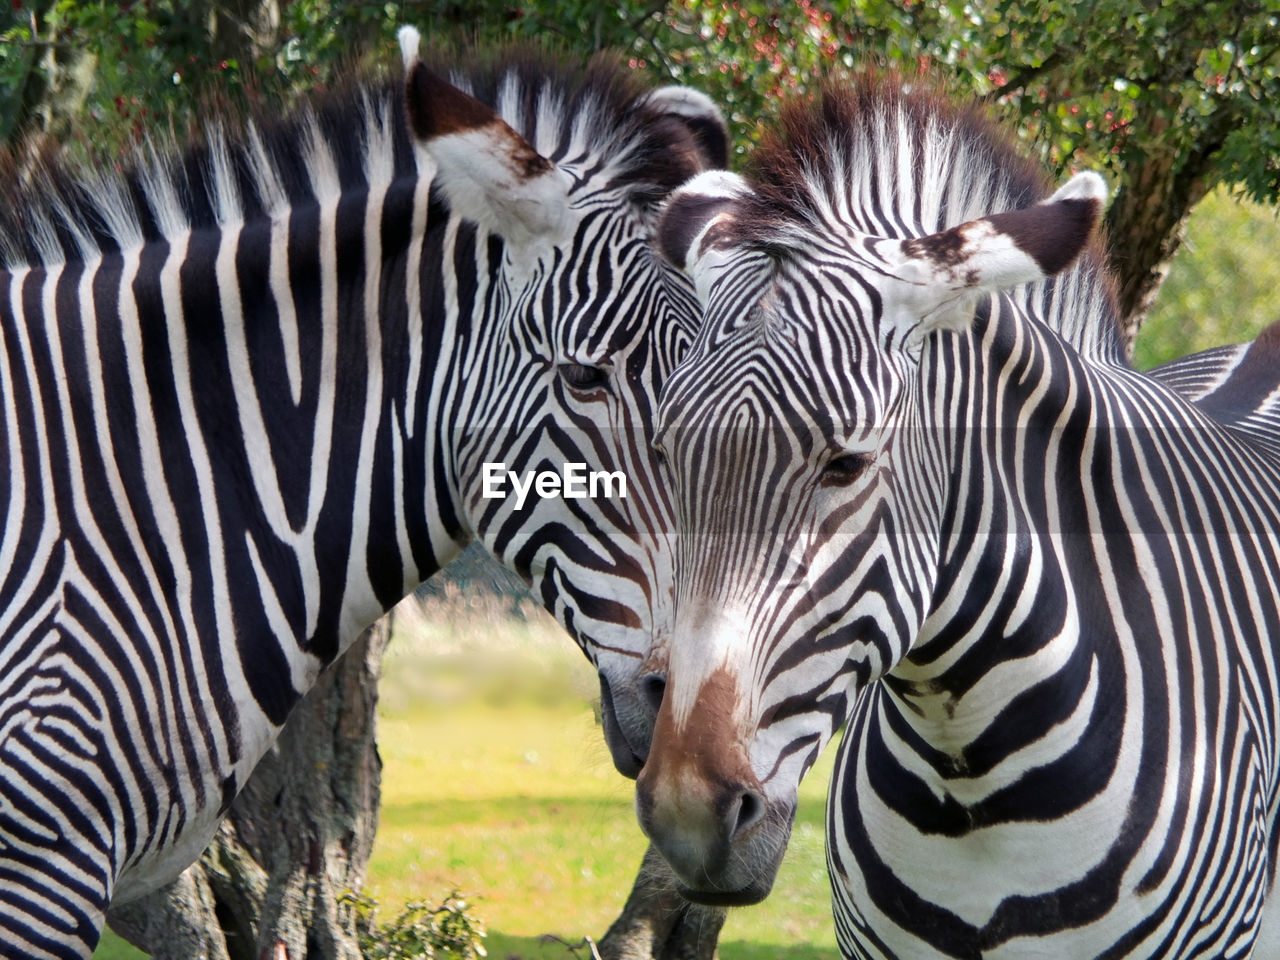 VIEW OF TWO ZEBRAS STANDING IN A ZEBRA